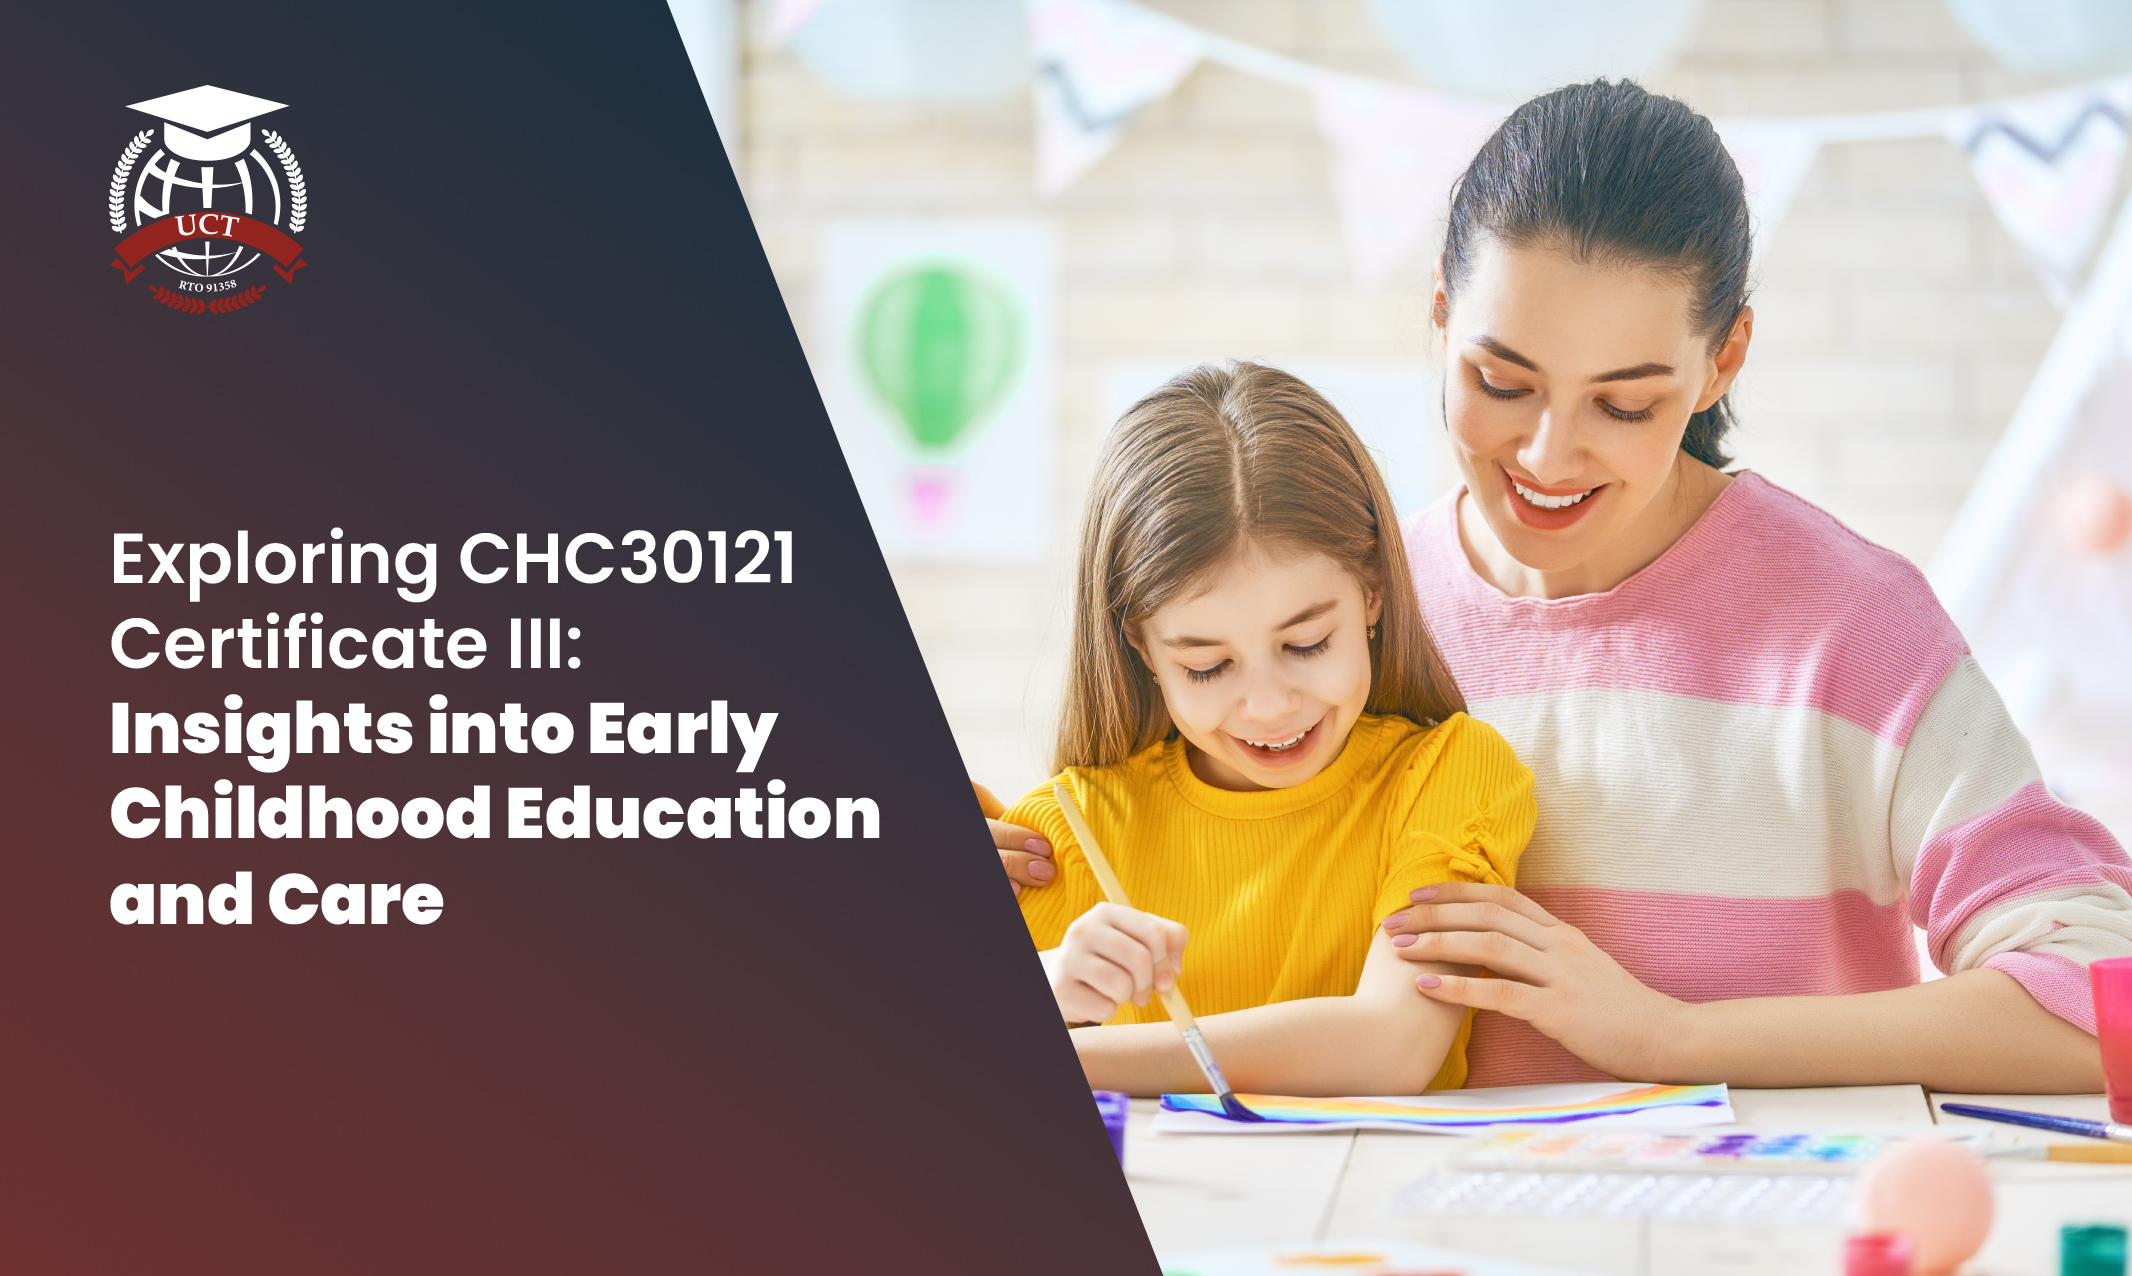 Exploring CHC30121 Certificate III: Insights into Early Childhood Education and Care